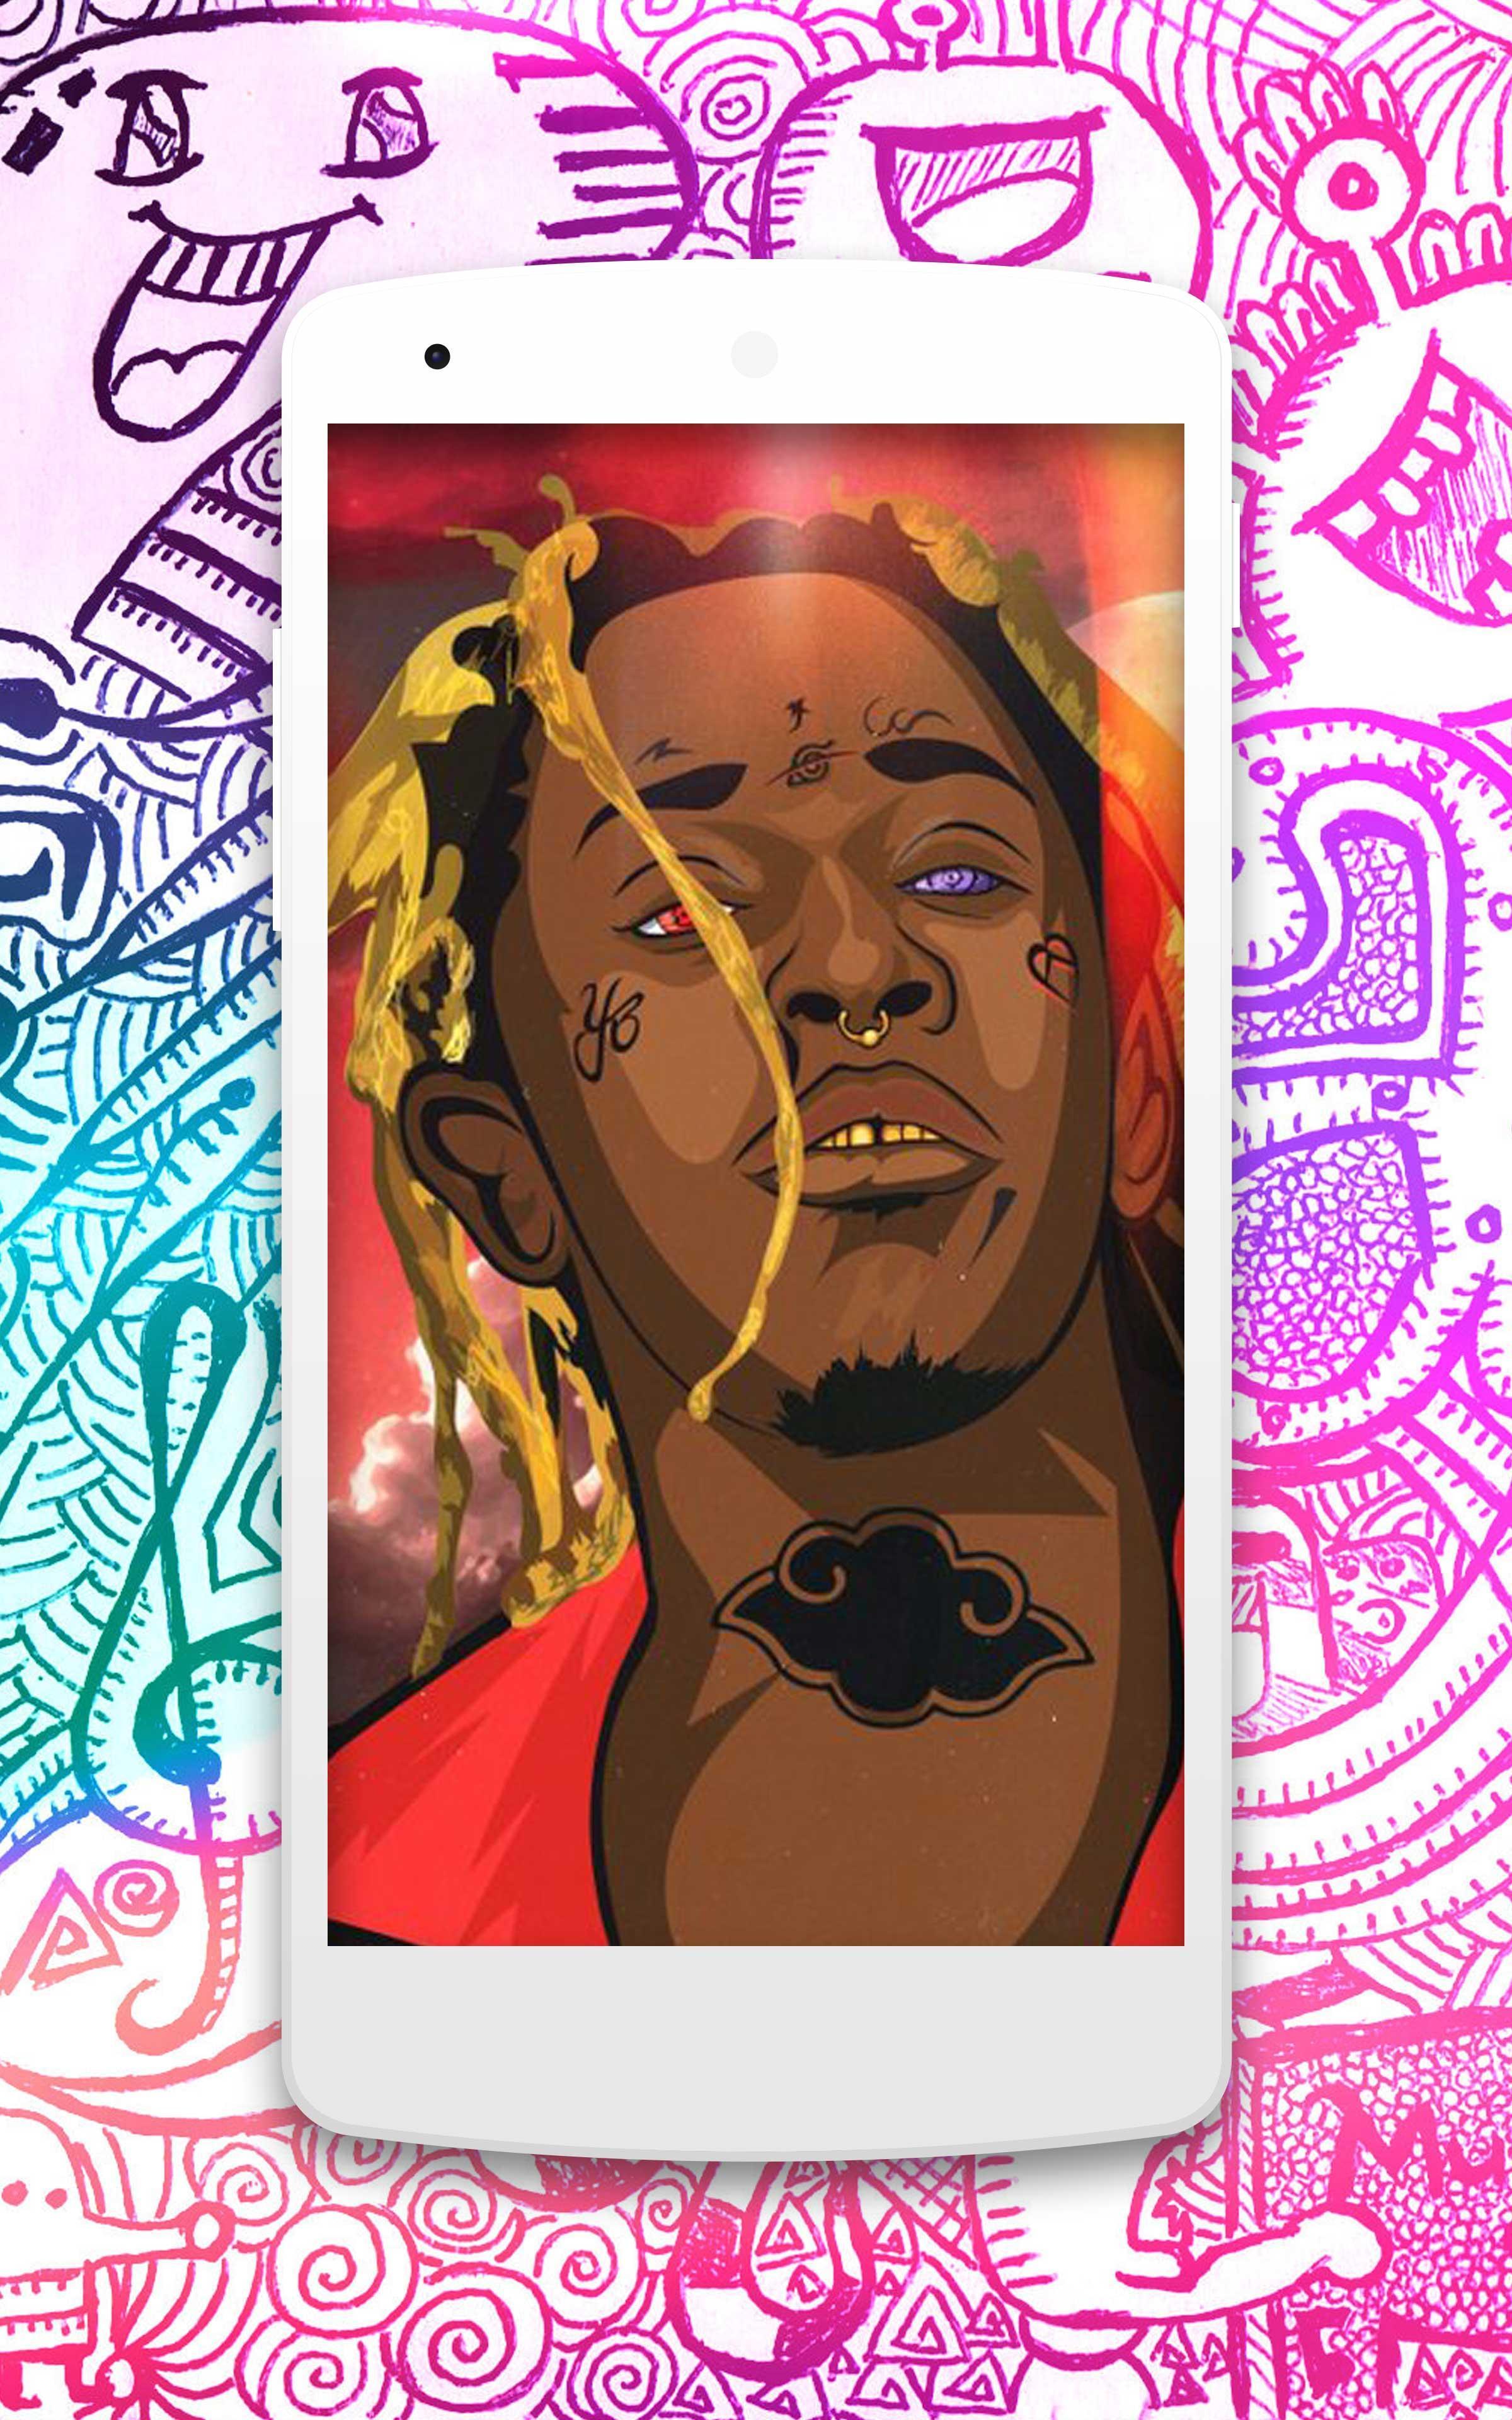 YOUNG THUG Wallpaper HD for Android